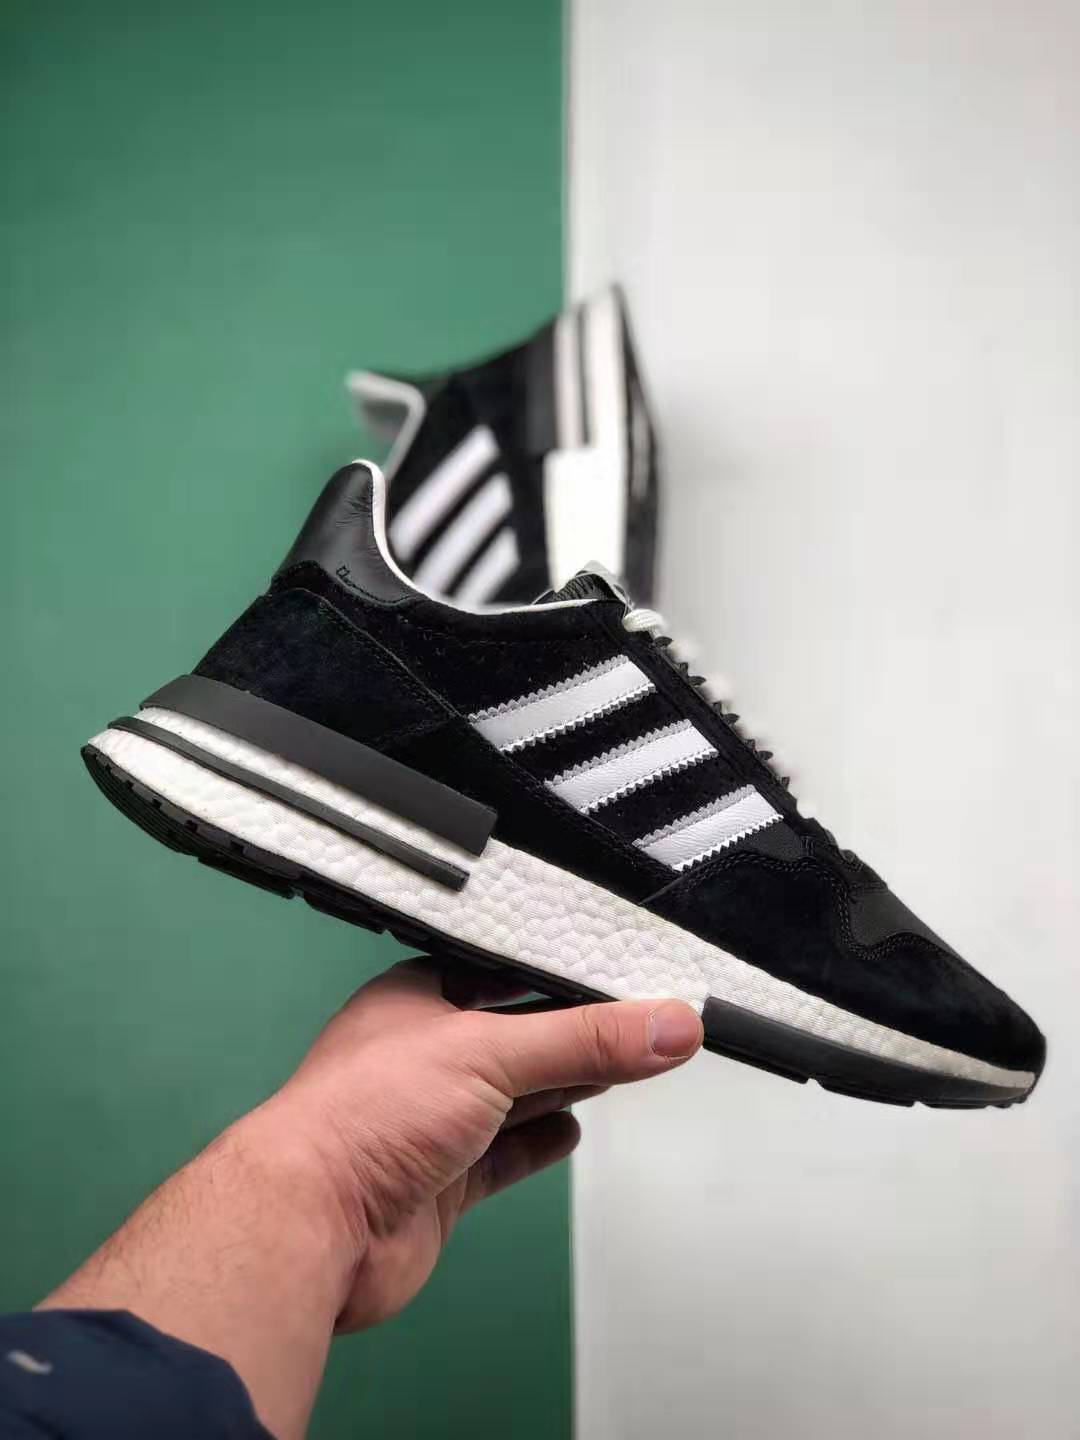 Adidas ZX500 RM Boost Originals BB6822 - Stylish and Comfortable Footwear